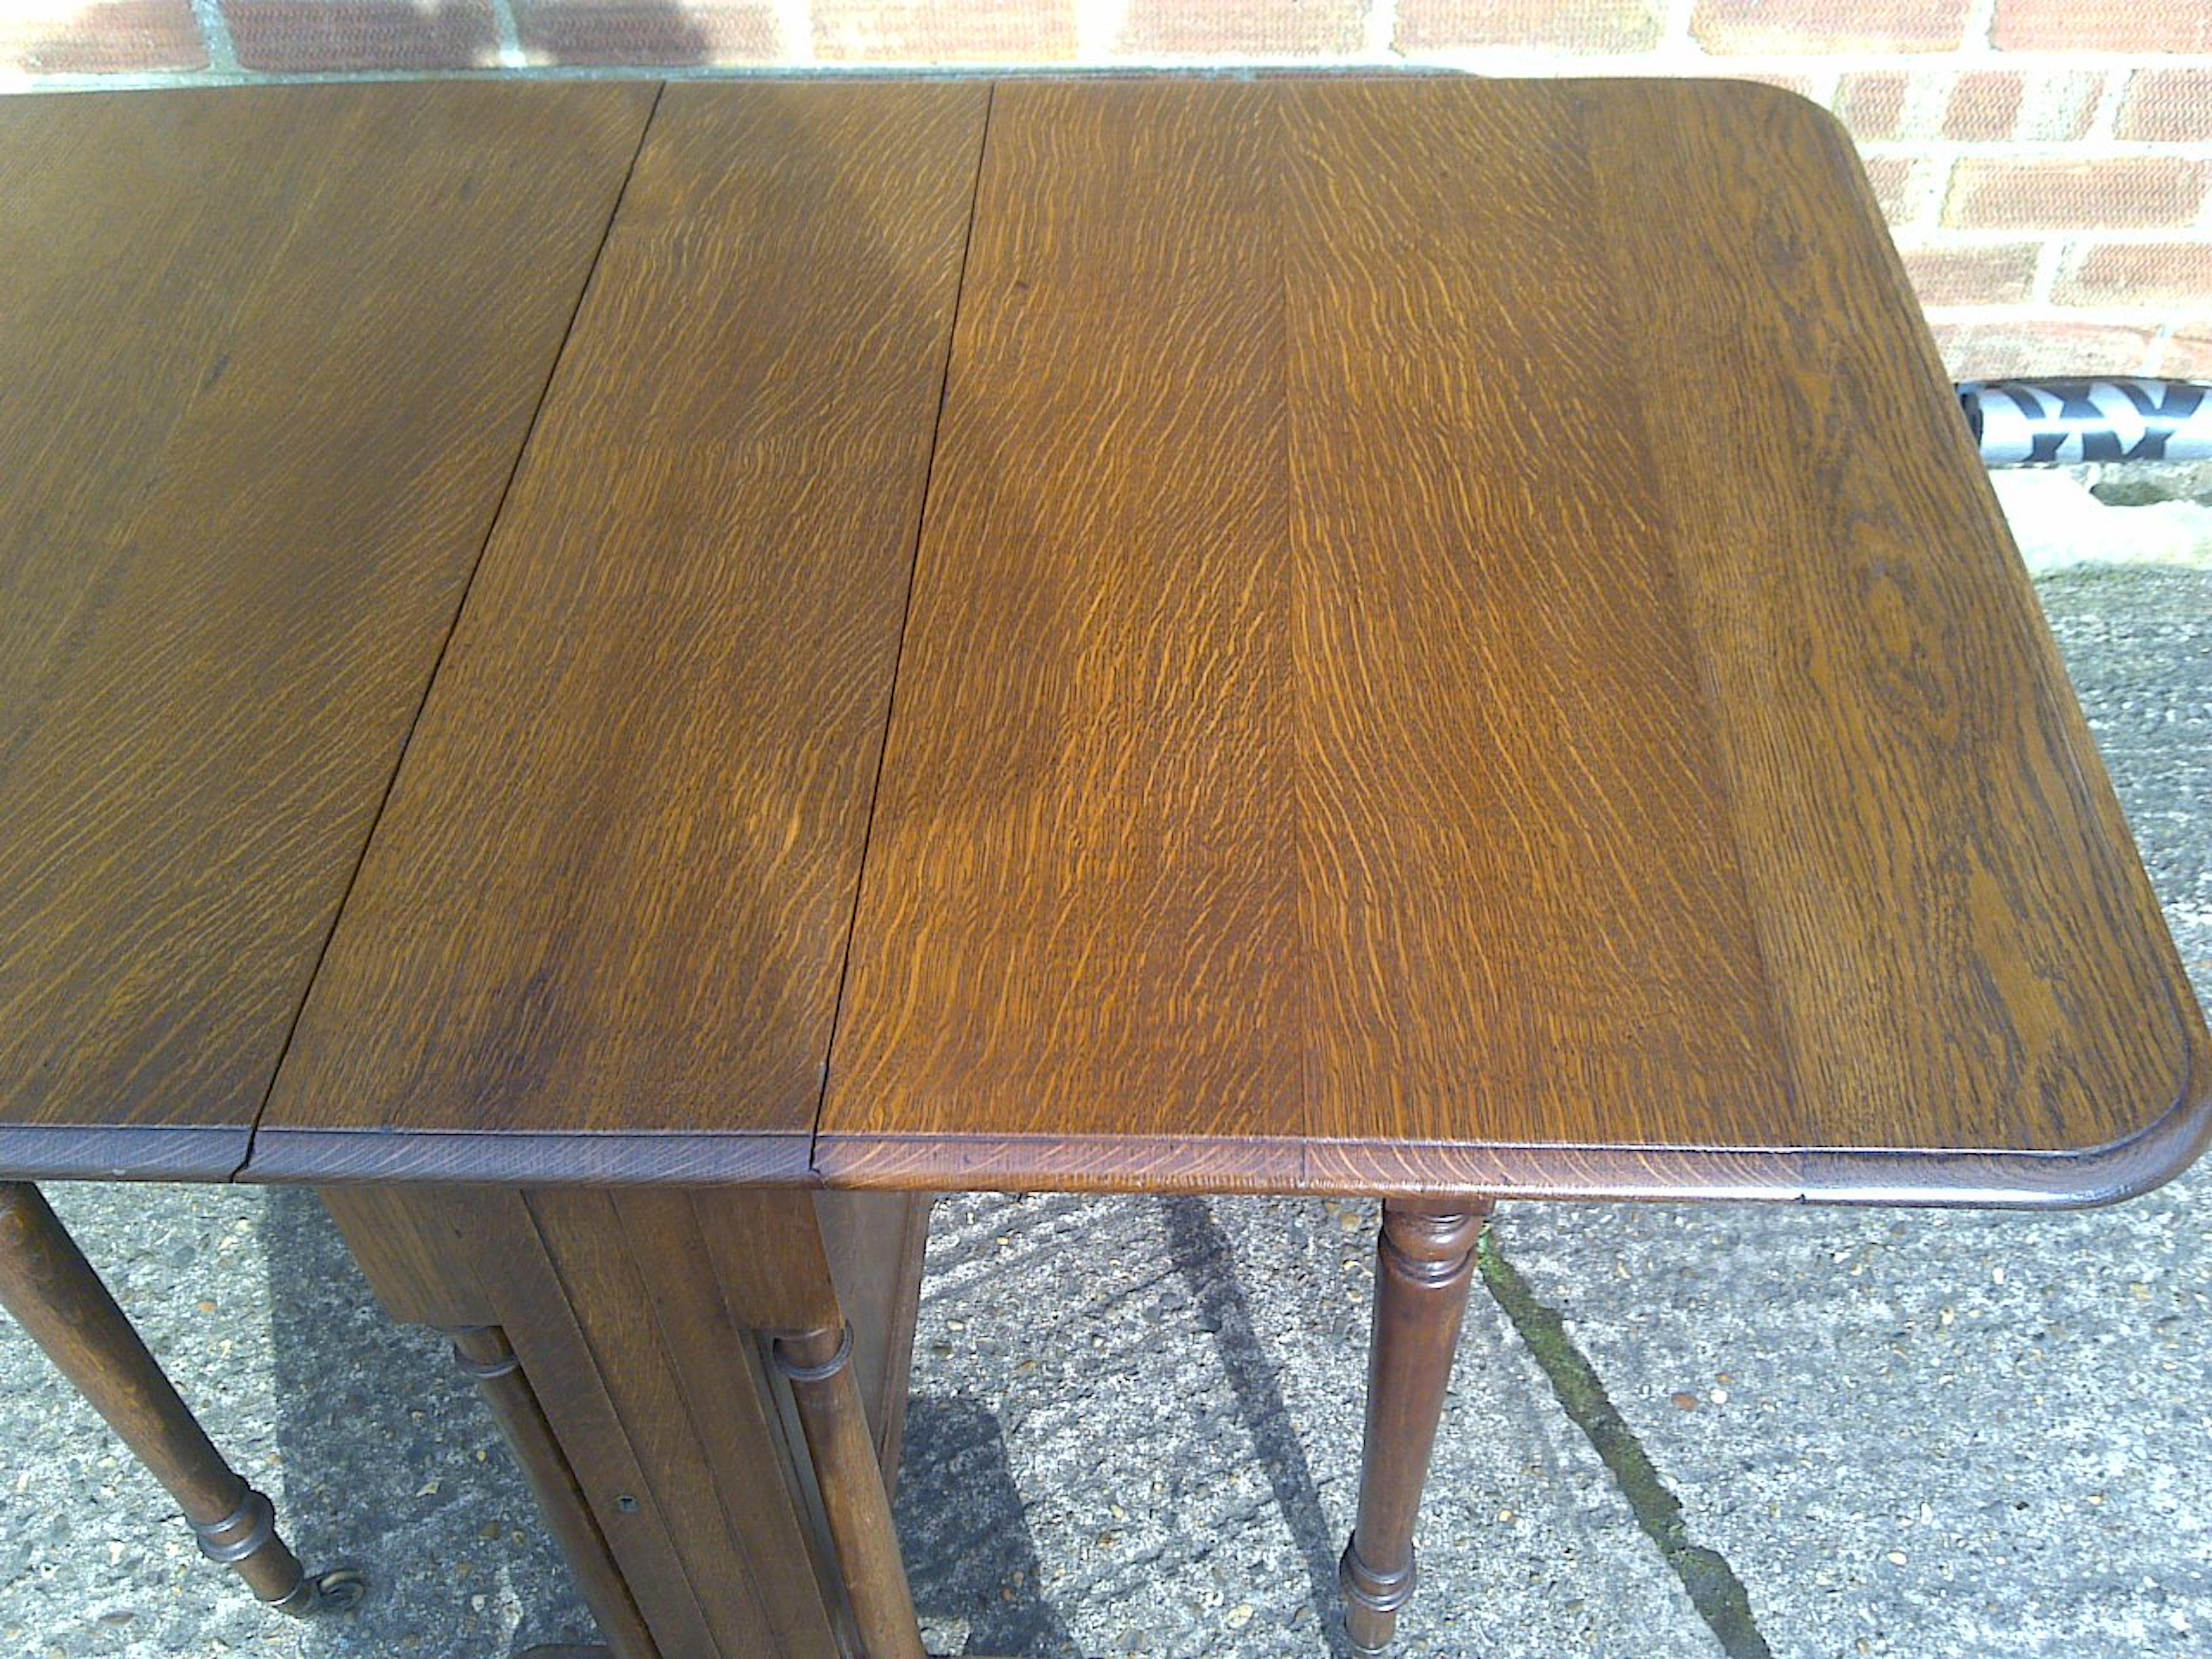 William IV C Hindleys 134 Oxford St. London, a Quality Drop Leaf Victorian Oak Dining Table For Sale